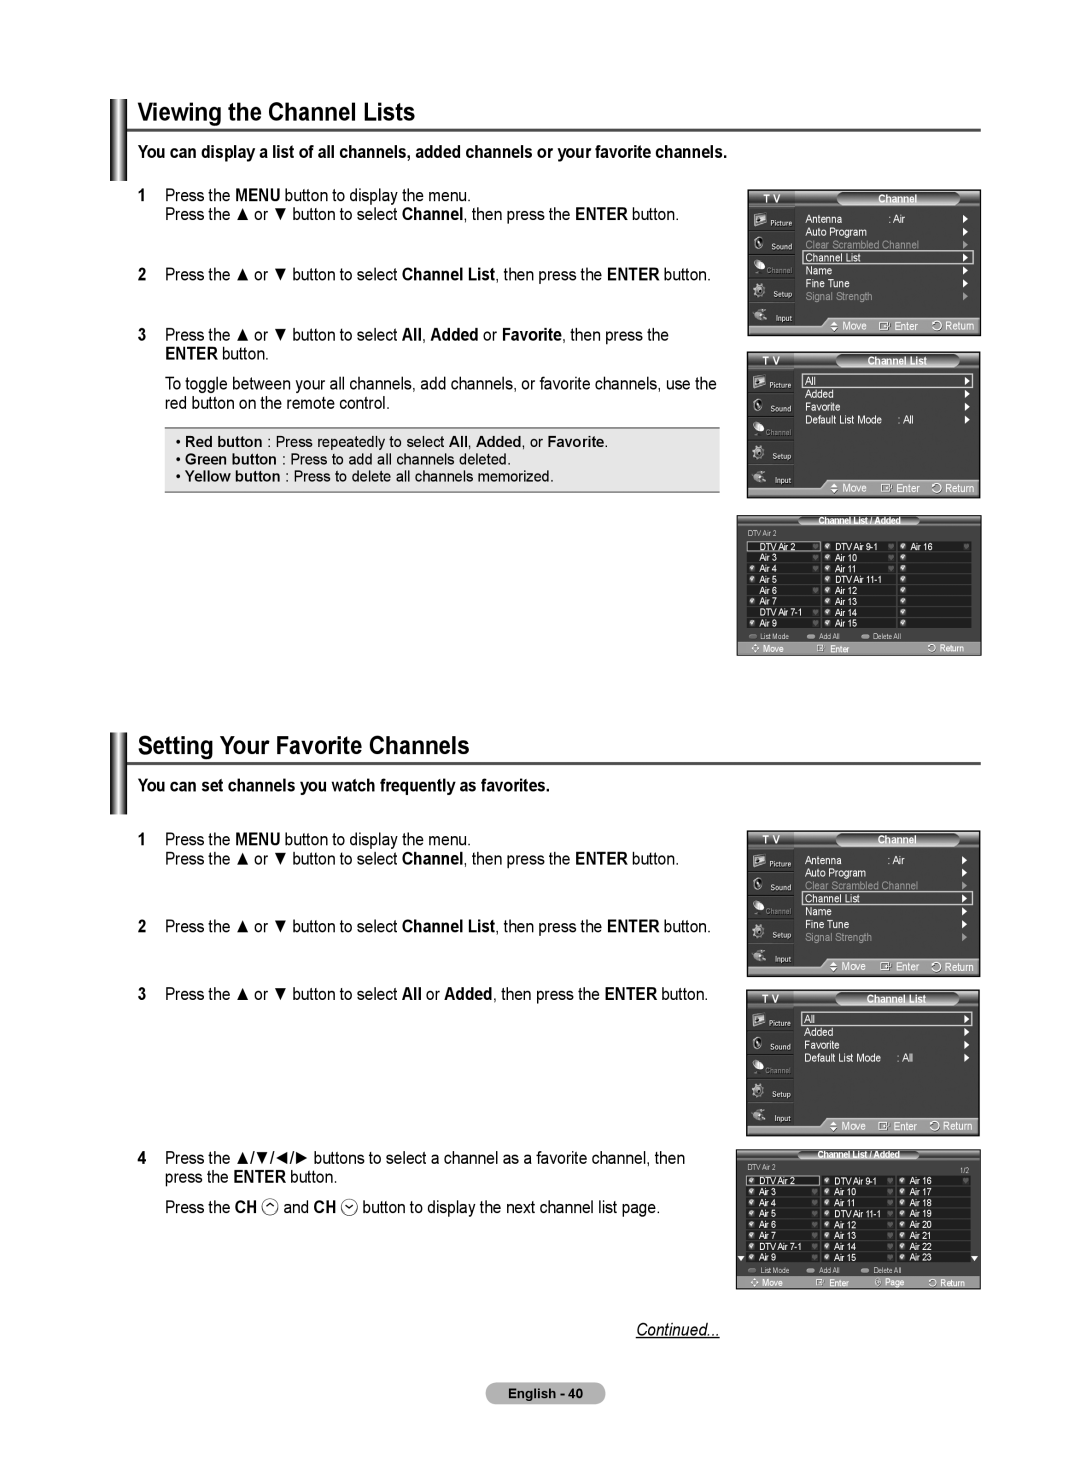 Samsung 460 user manual Viewing the Channel Lists, Setting Your Favorite Channels, Continued 